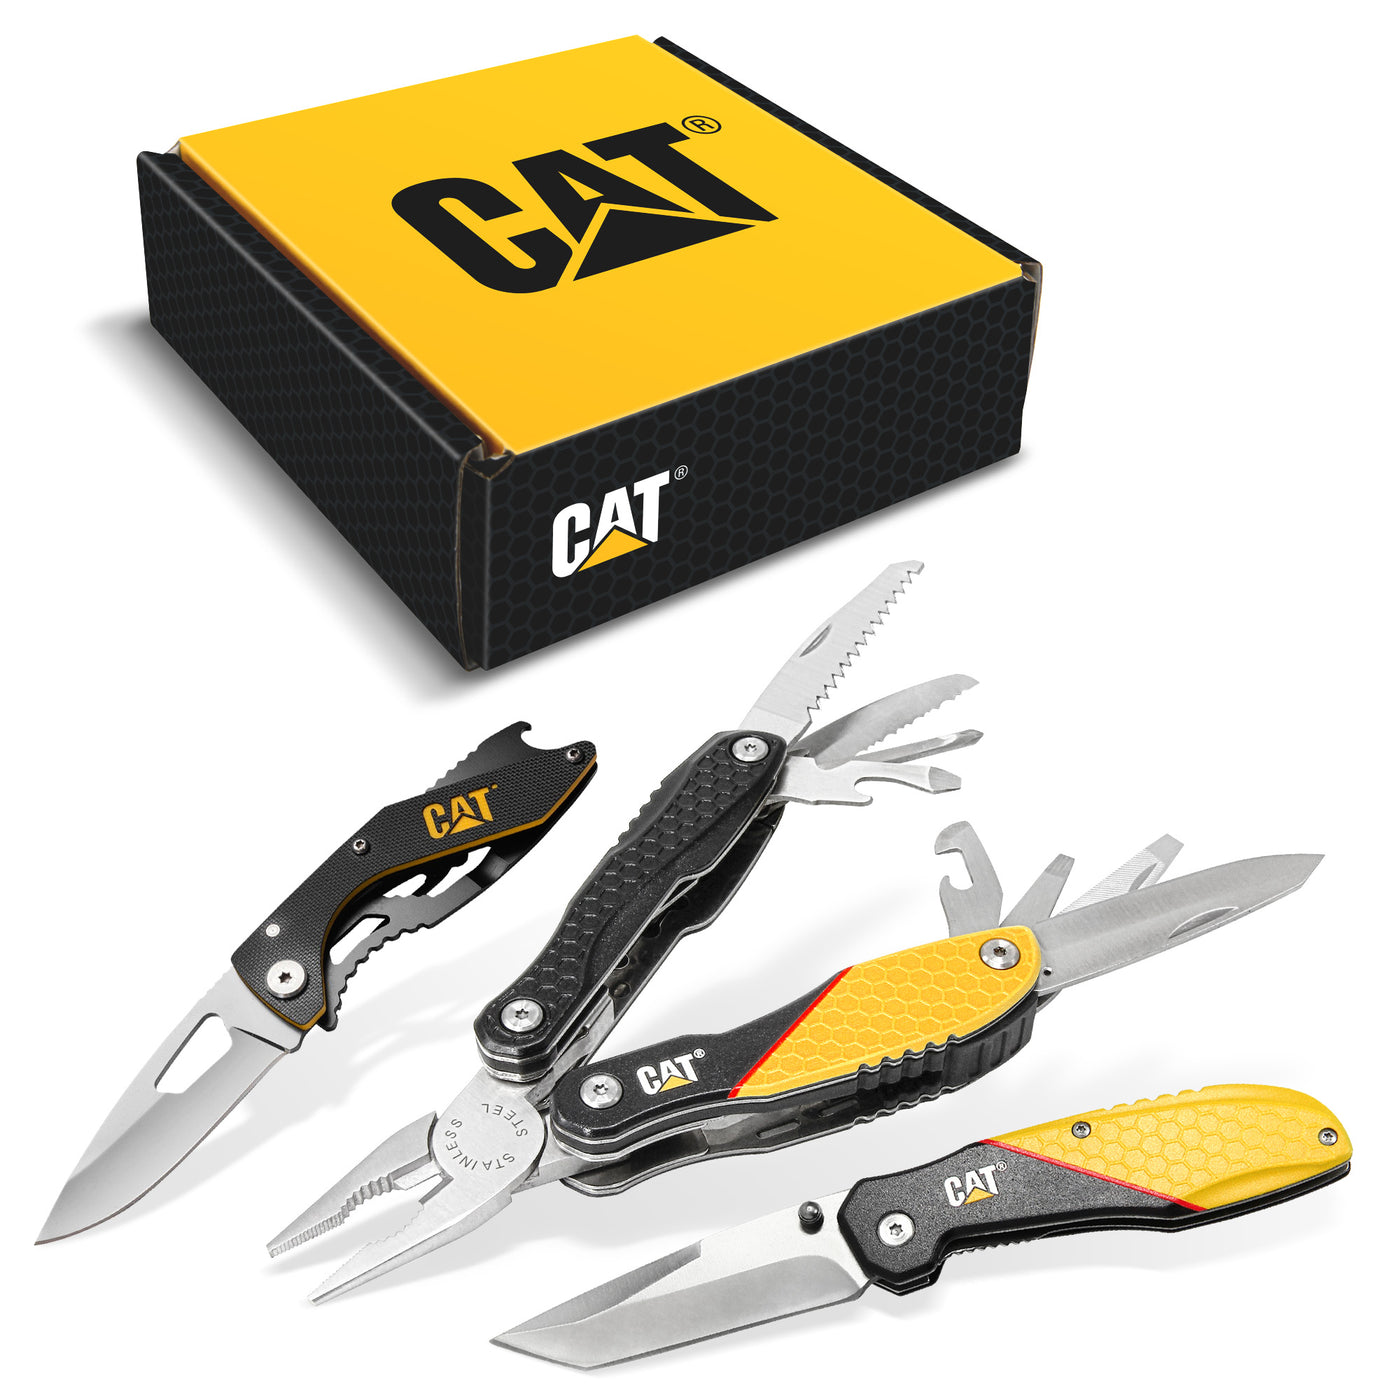 3 Piece Multi Tool and Pocket Knife Gift Set Box